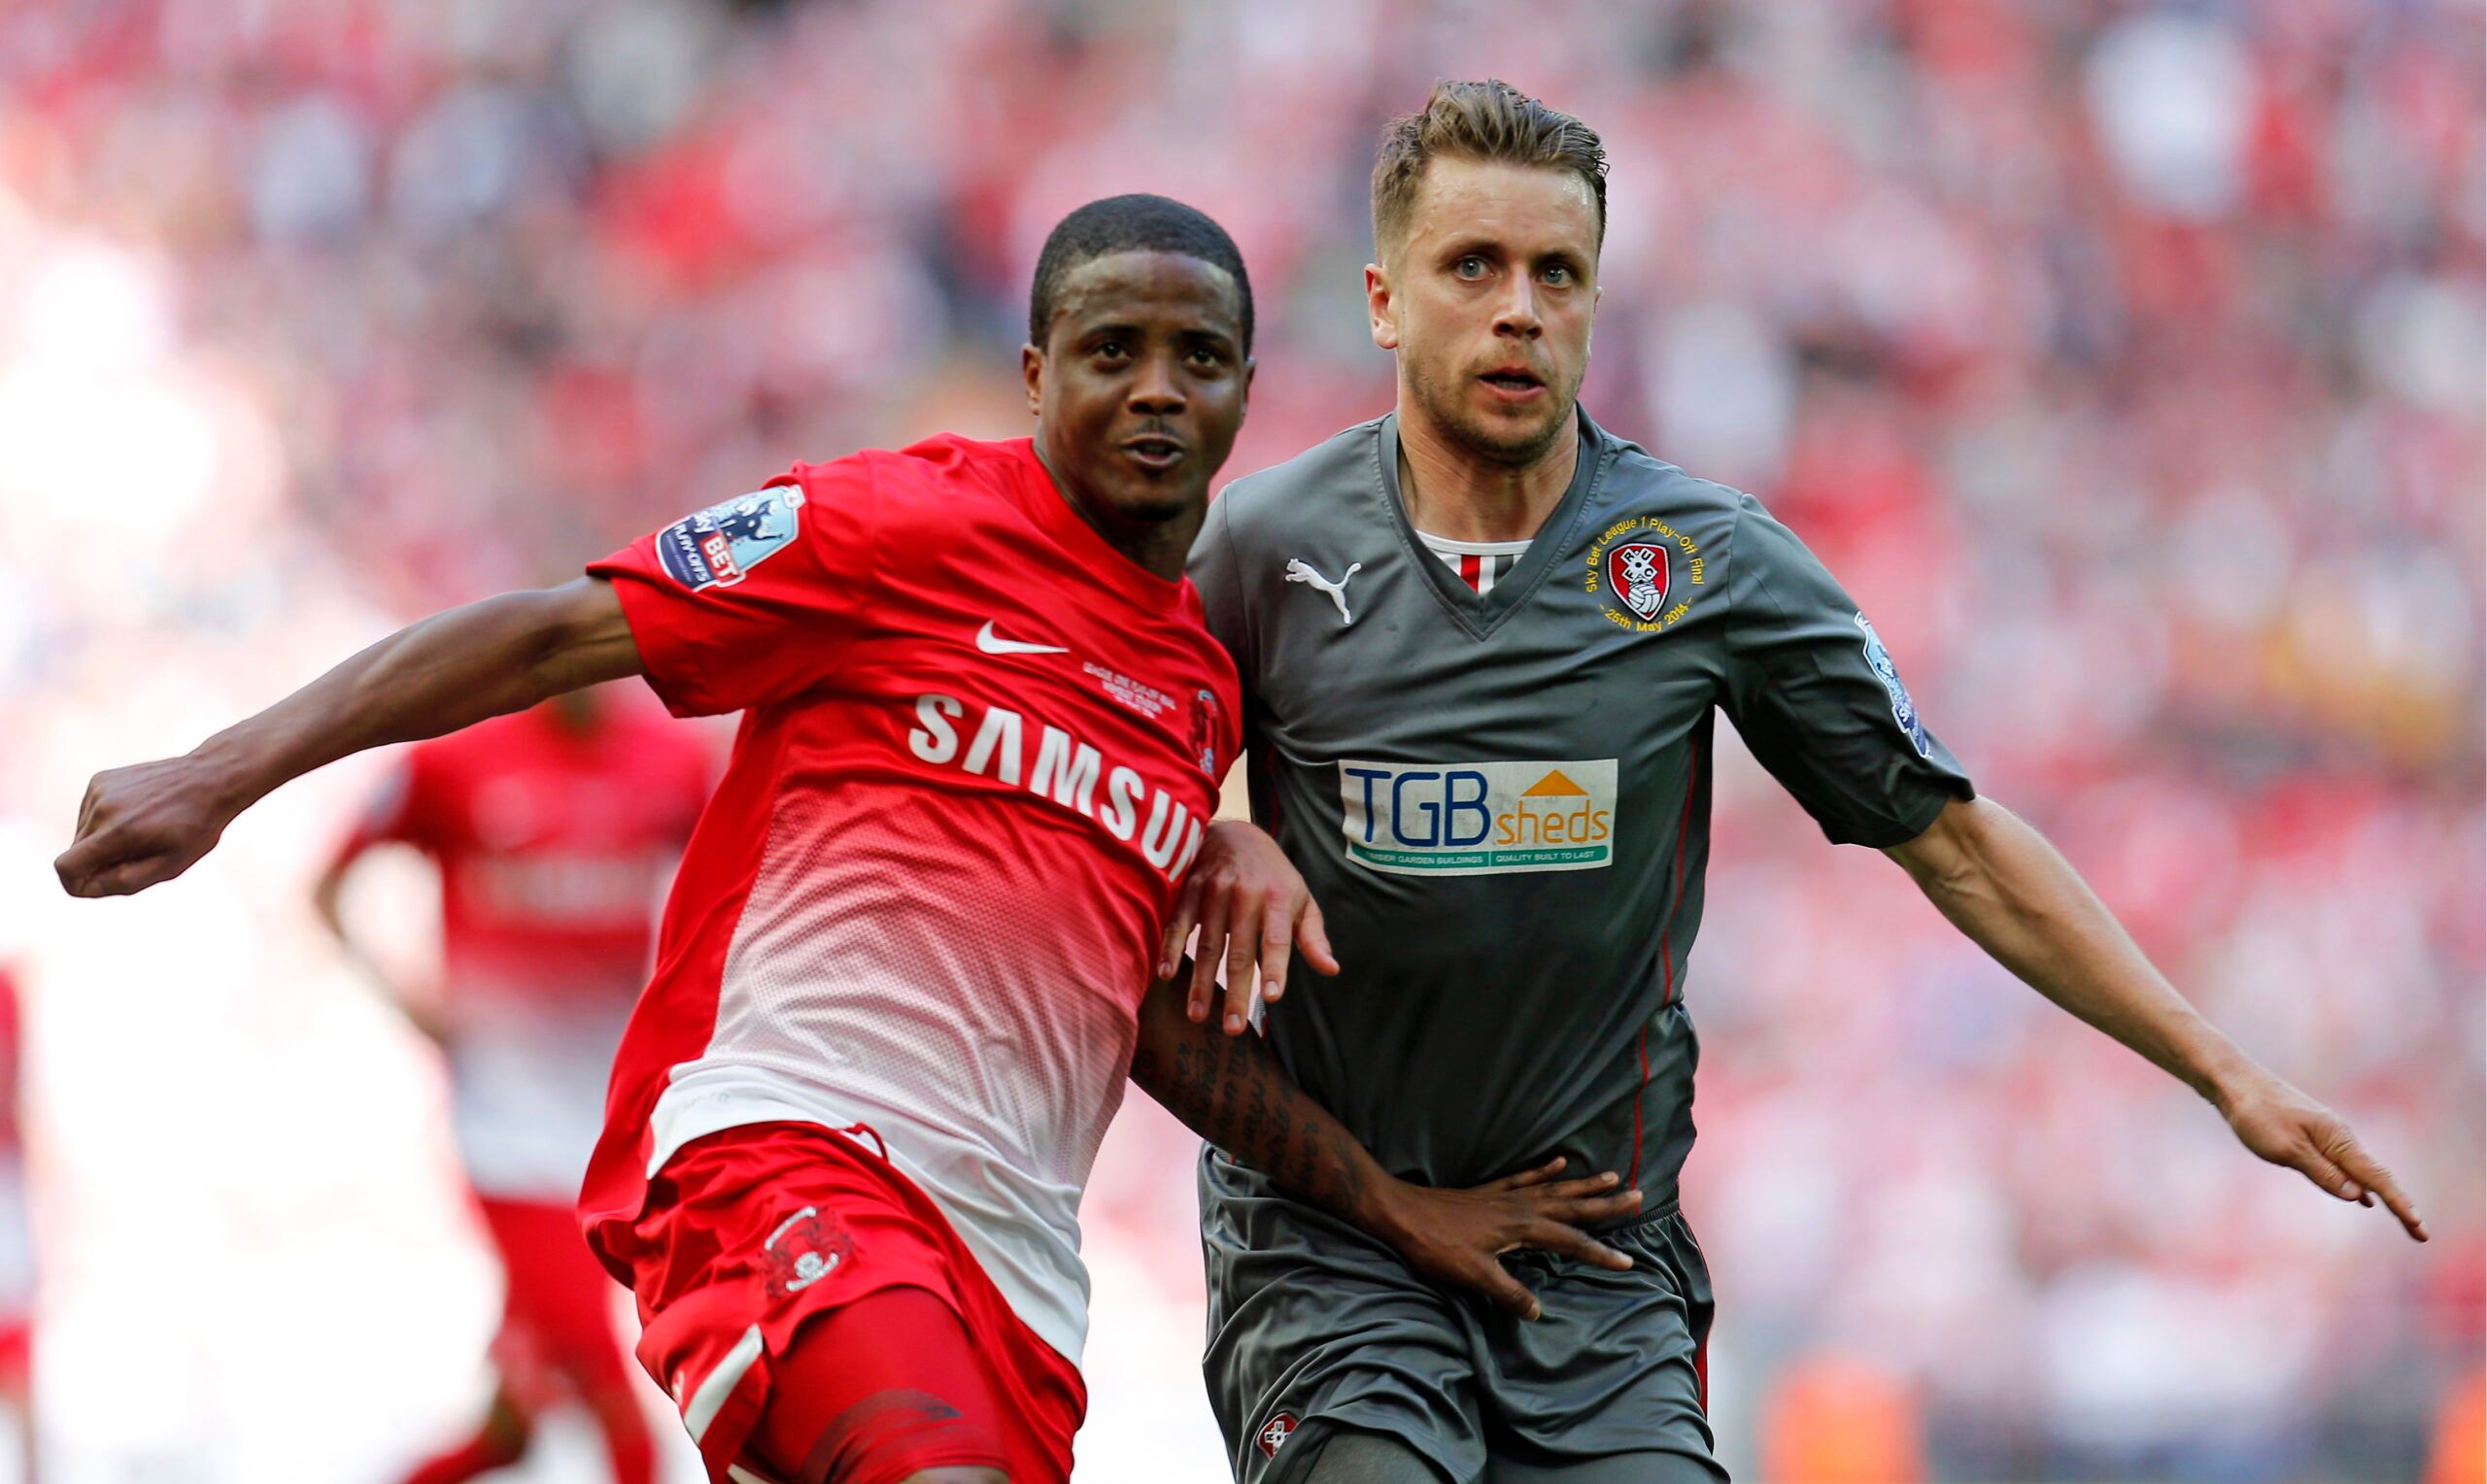 Football - Leyton Orient v Rotherham United - Sky Bet Football League One Play-Off Final - Wembley Stadium - 13/14 - 25/5/14 
Rotherham's Kari Arnason in action against Leyton Orient's Moses Odubajo  
Mandatory Credit: Action Images / Andrew Couldridge 
EDITORIAL USE ONLY. No use with unauthorized audio, video, data, fixture lists, club/league logos or 